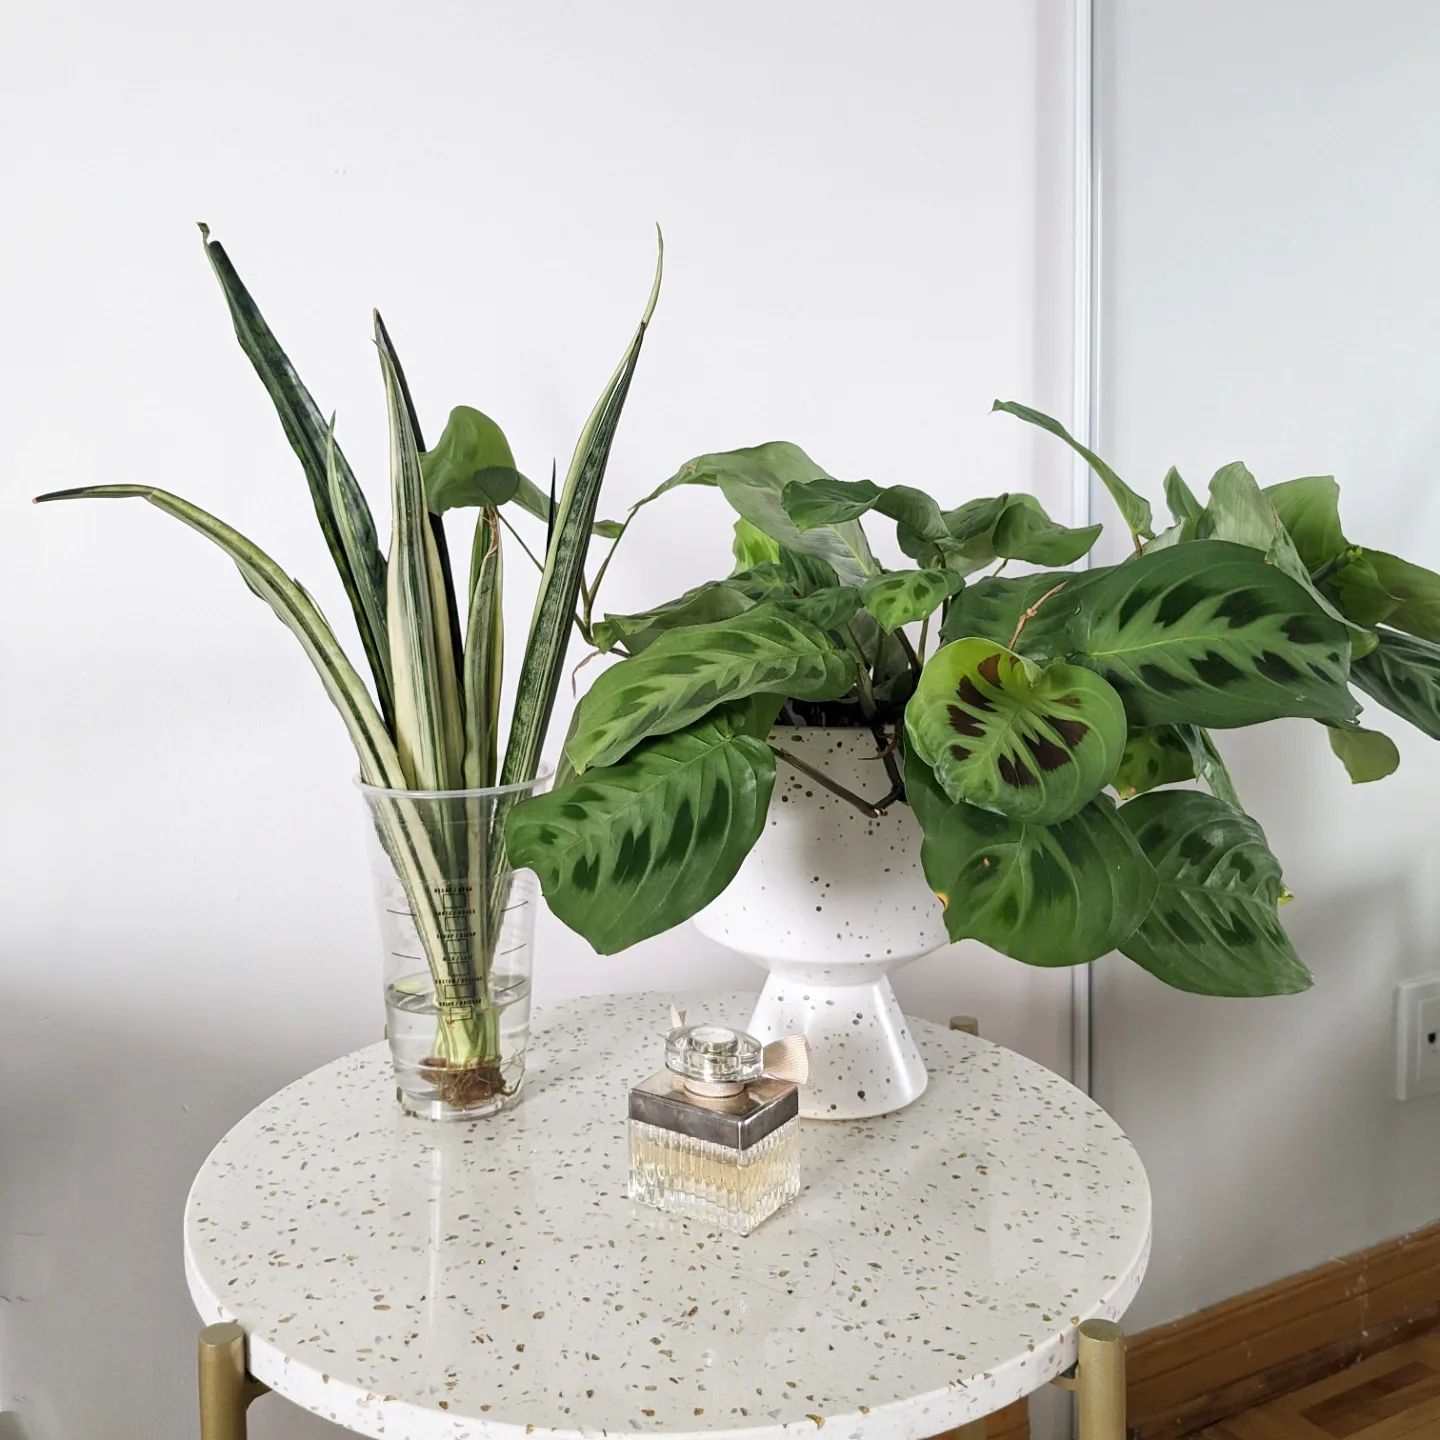 How To Grow And Care For Sansevieria